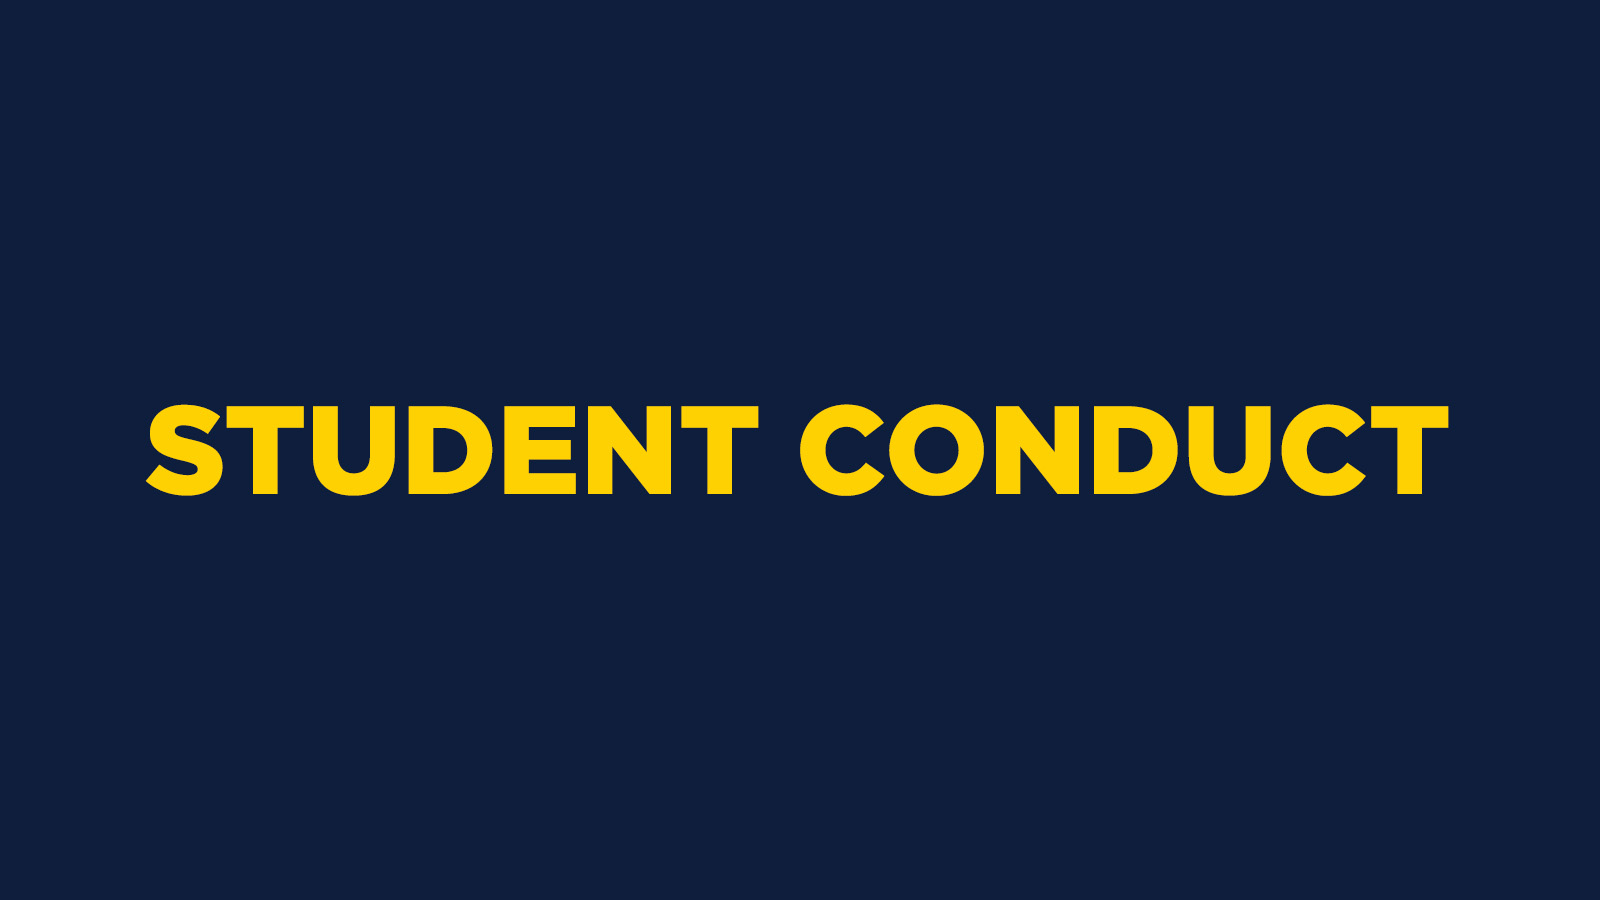 Student Conduct